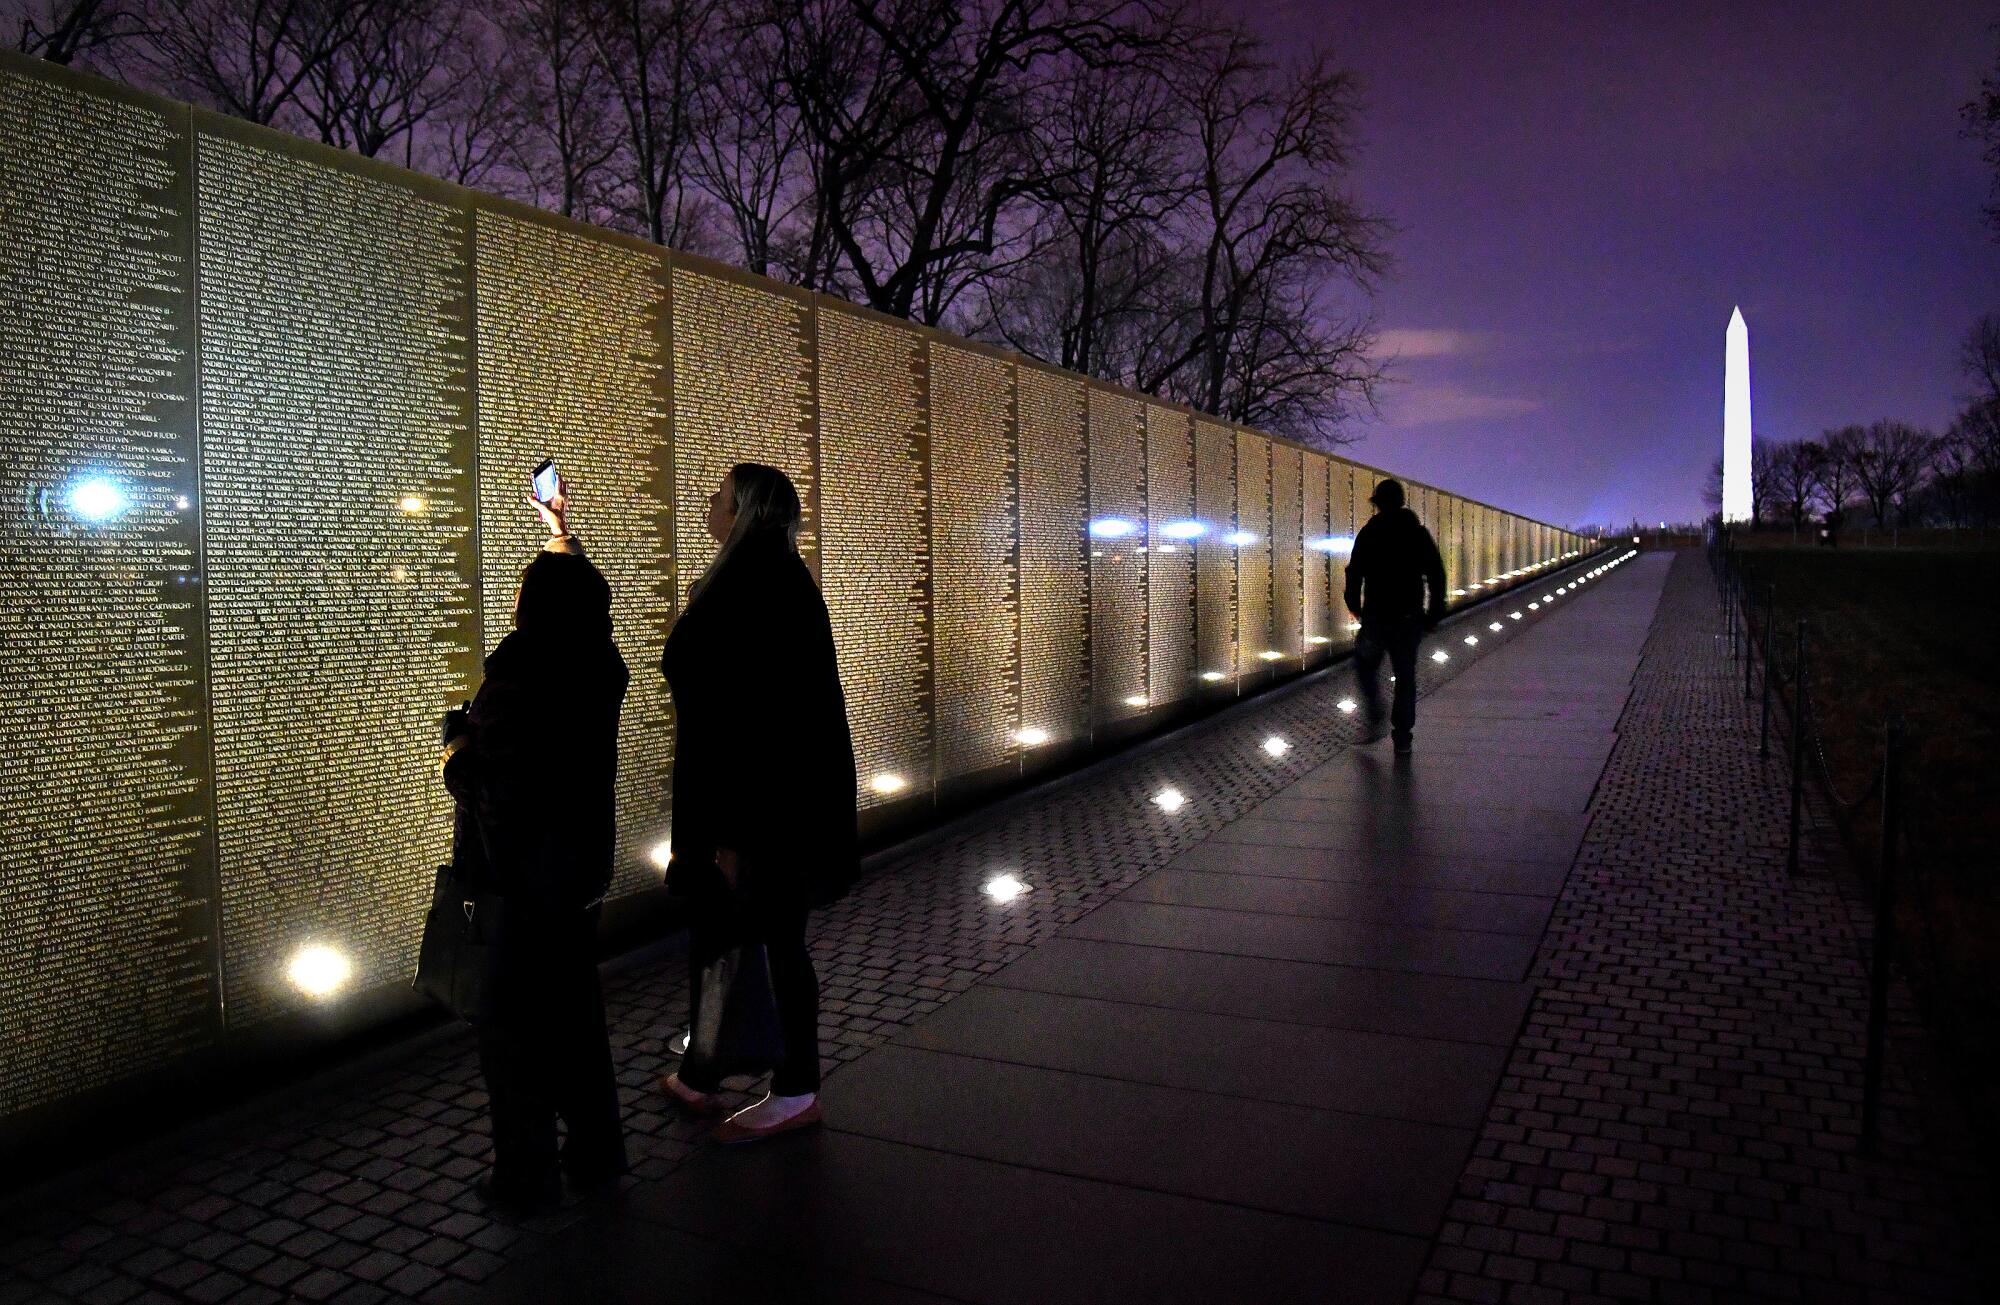 Maya Lin designed the Vietnam Veterans Memorial in Washington in 1981, when she was a 21-year-old student at Yale University.